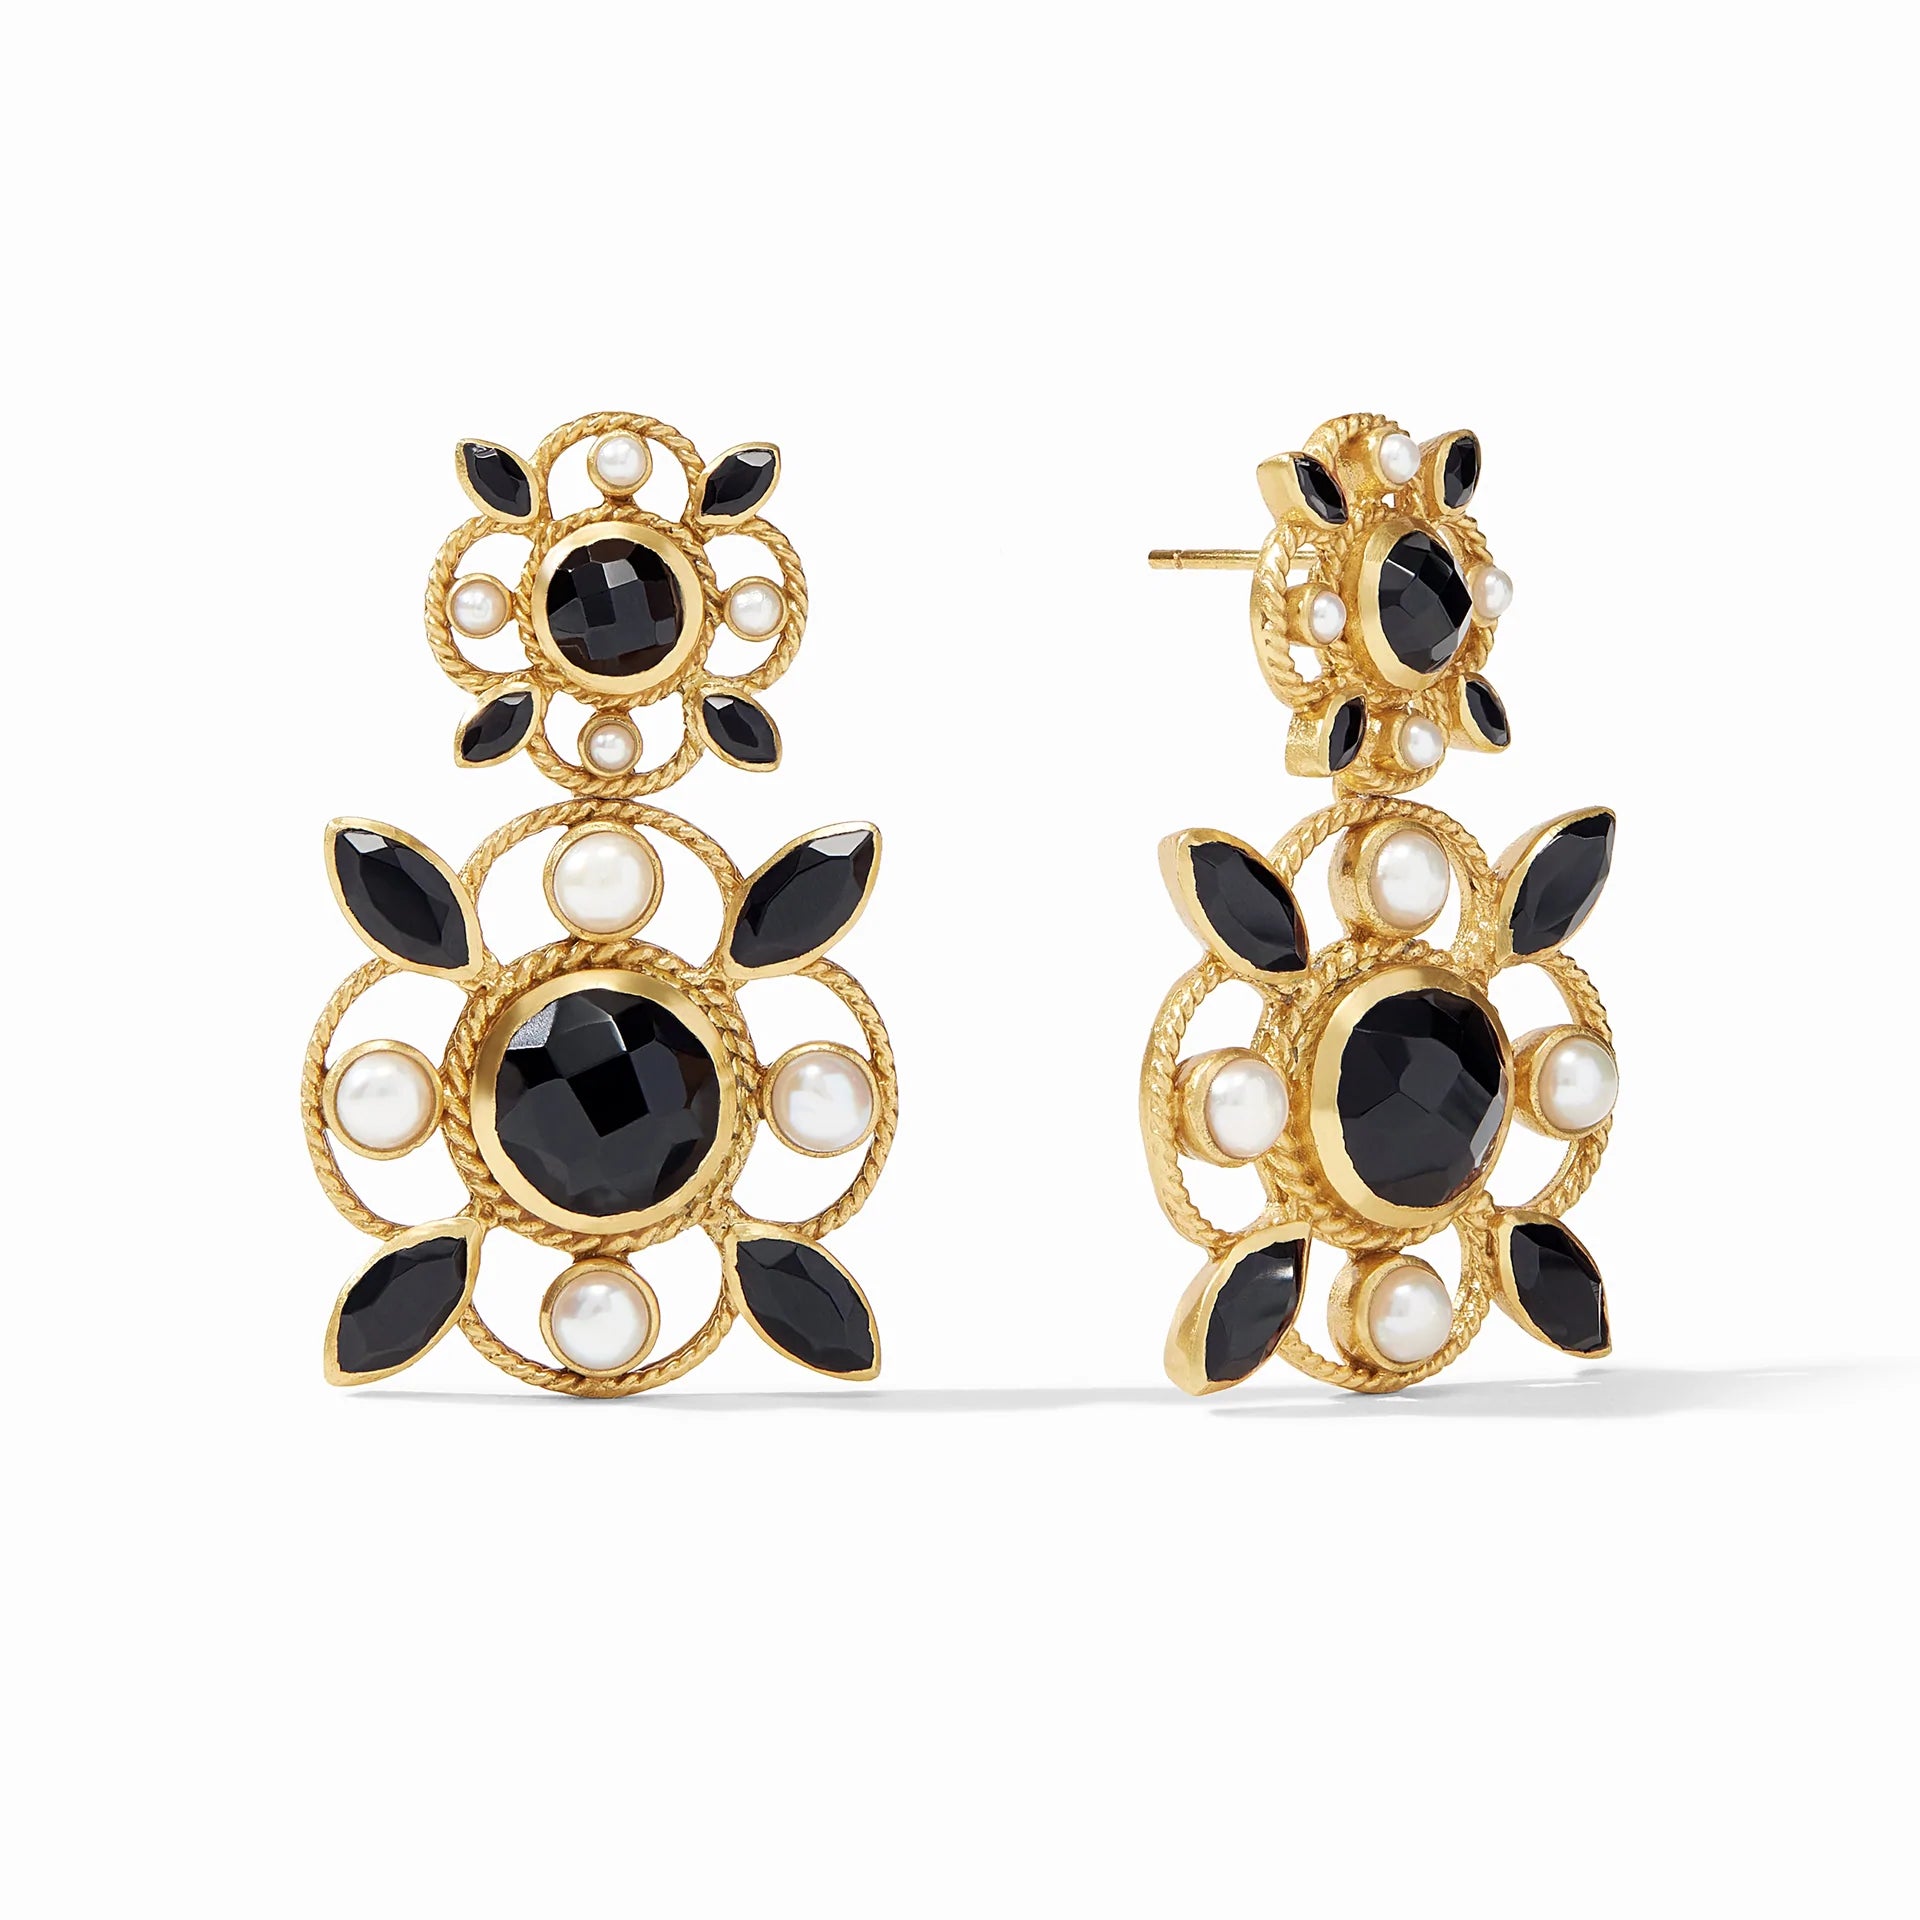 Gold with Black and Clear Crystals Gun Shaped Clip On Earrings and Pin  Brooch (Un paio di orecchini e una spilla), Life is Beautiful: Milan, 2021